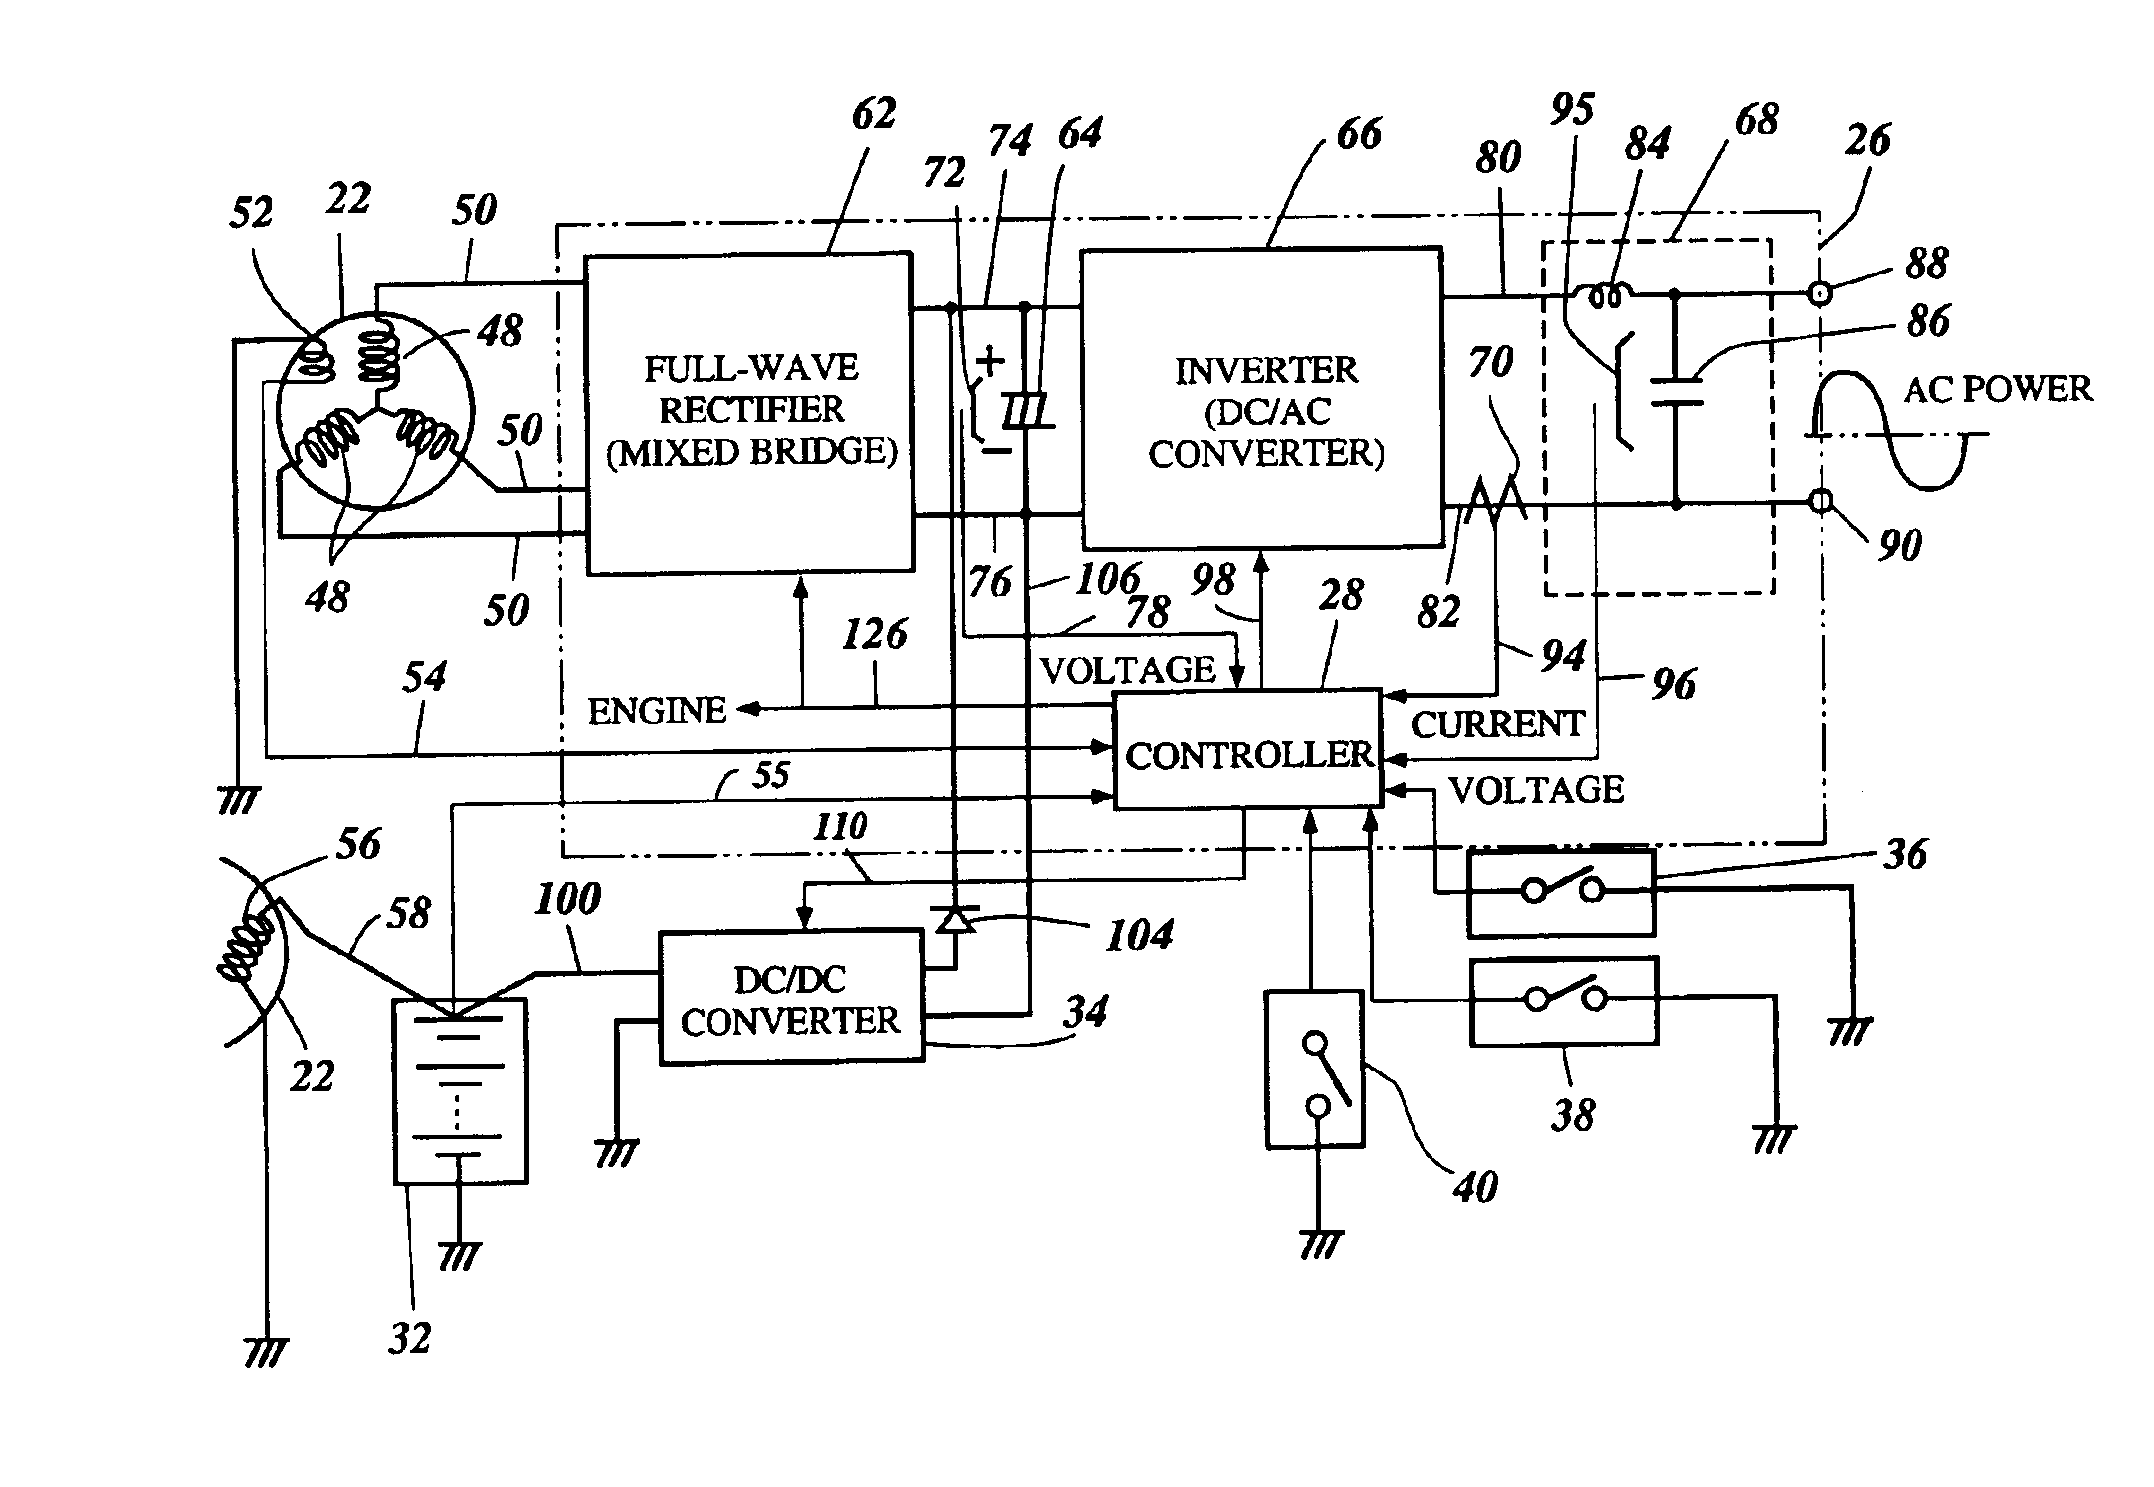 Portable power supply incorporating a generator driven by an engine